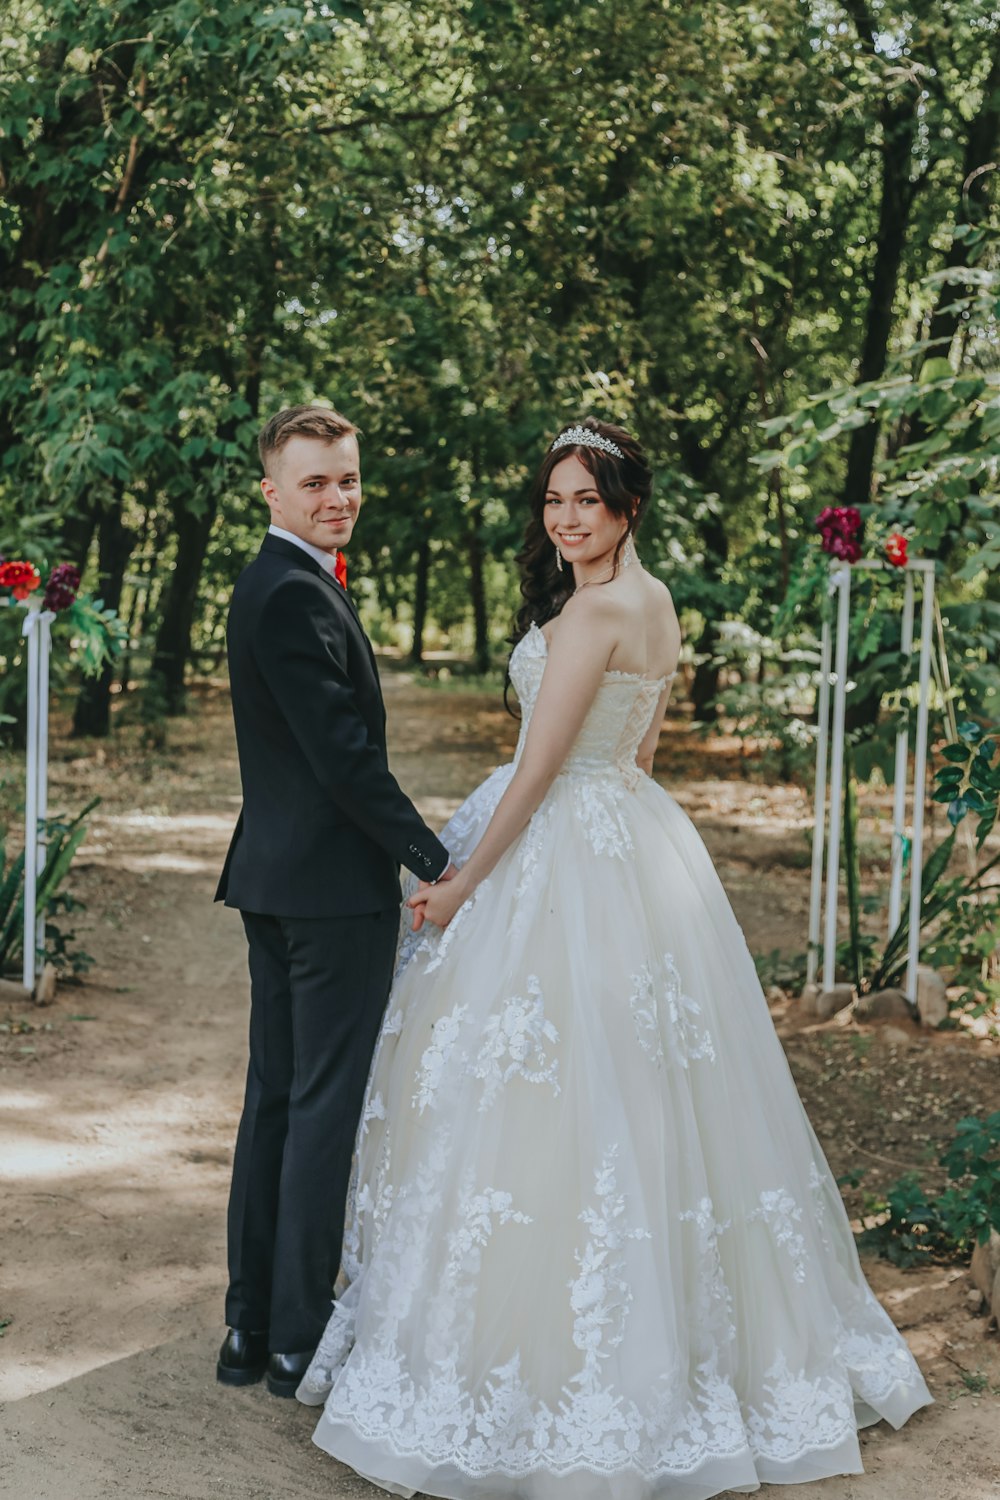 woman in white wedding dress and man in black suit